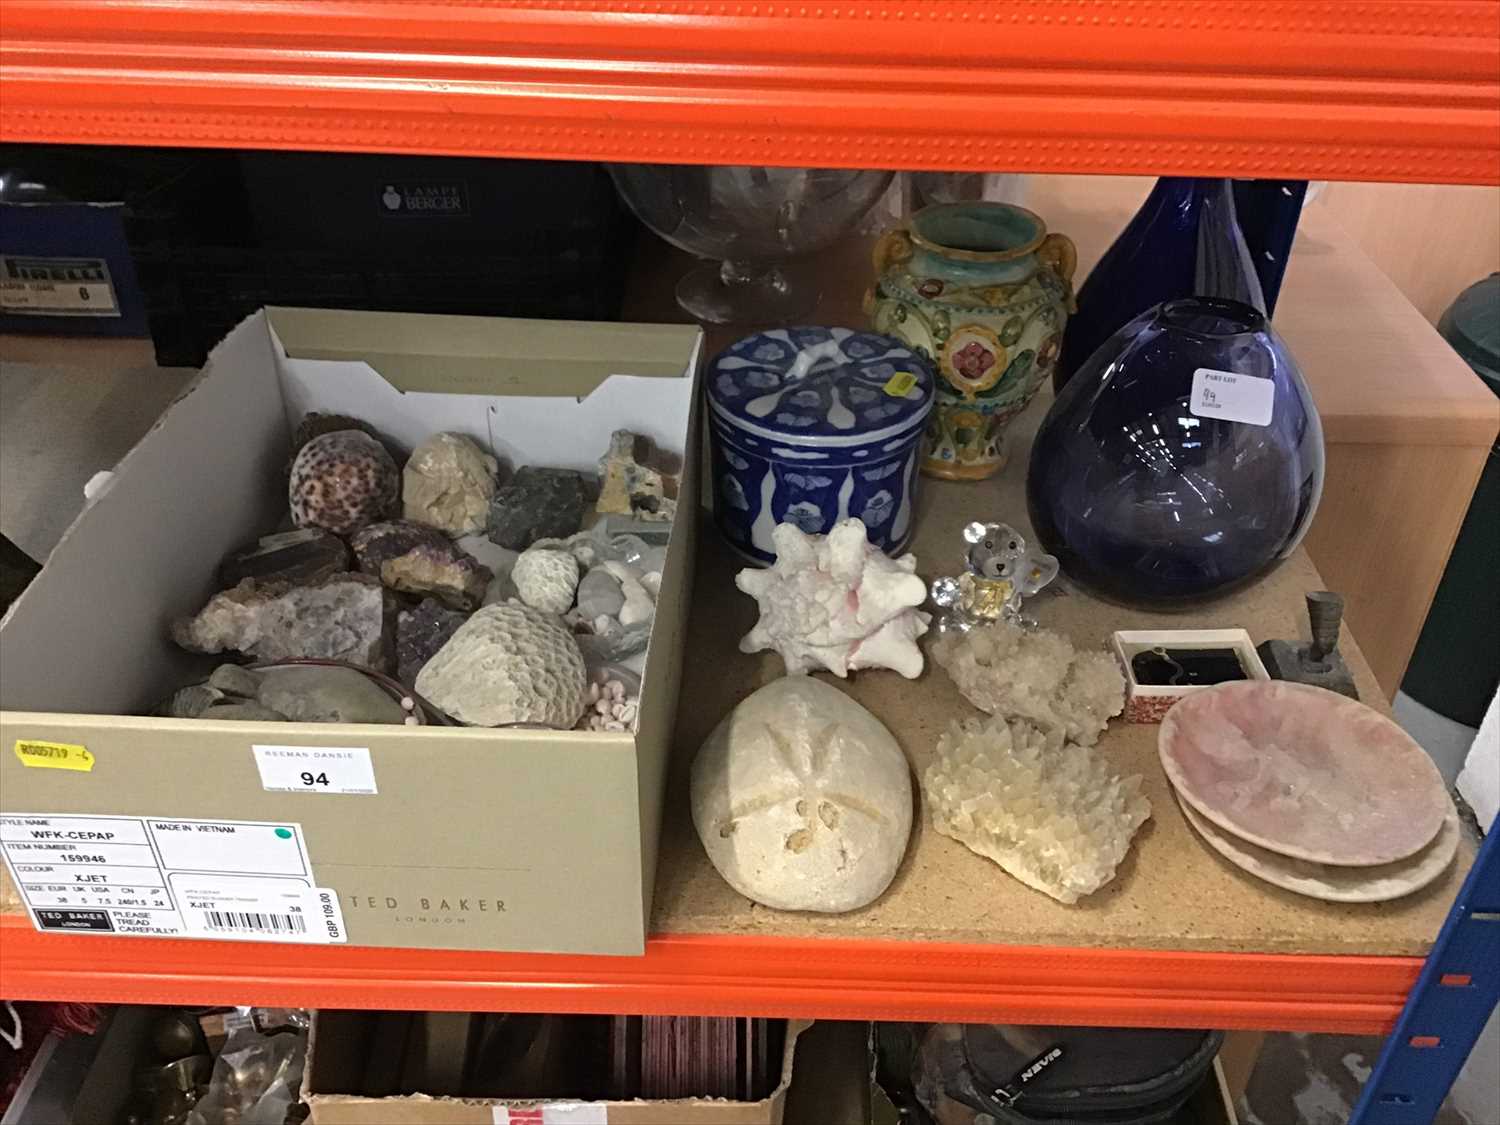 Lot 94 - Mixed lot of geological specimens and sundry items